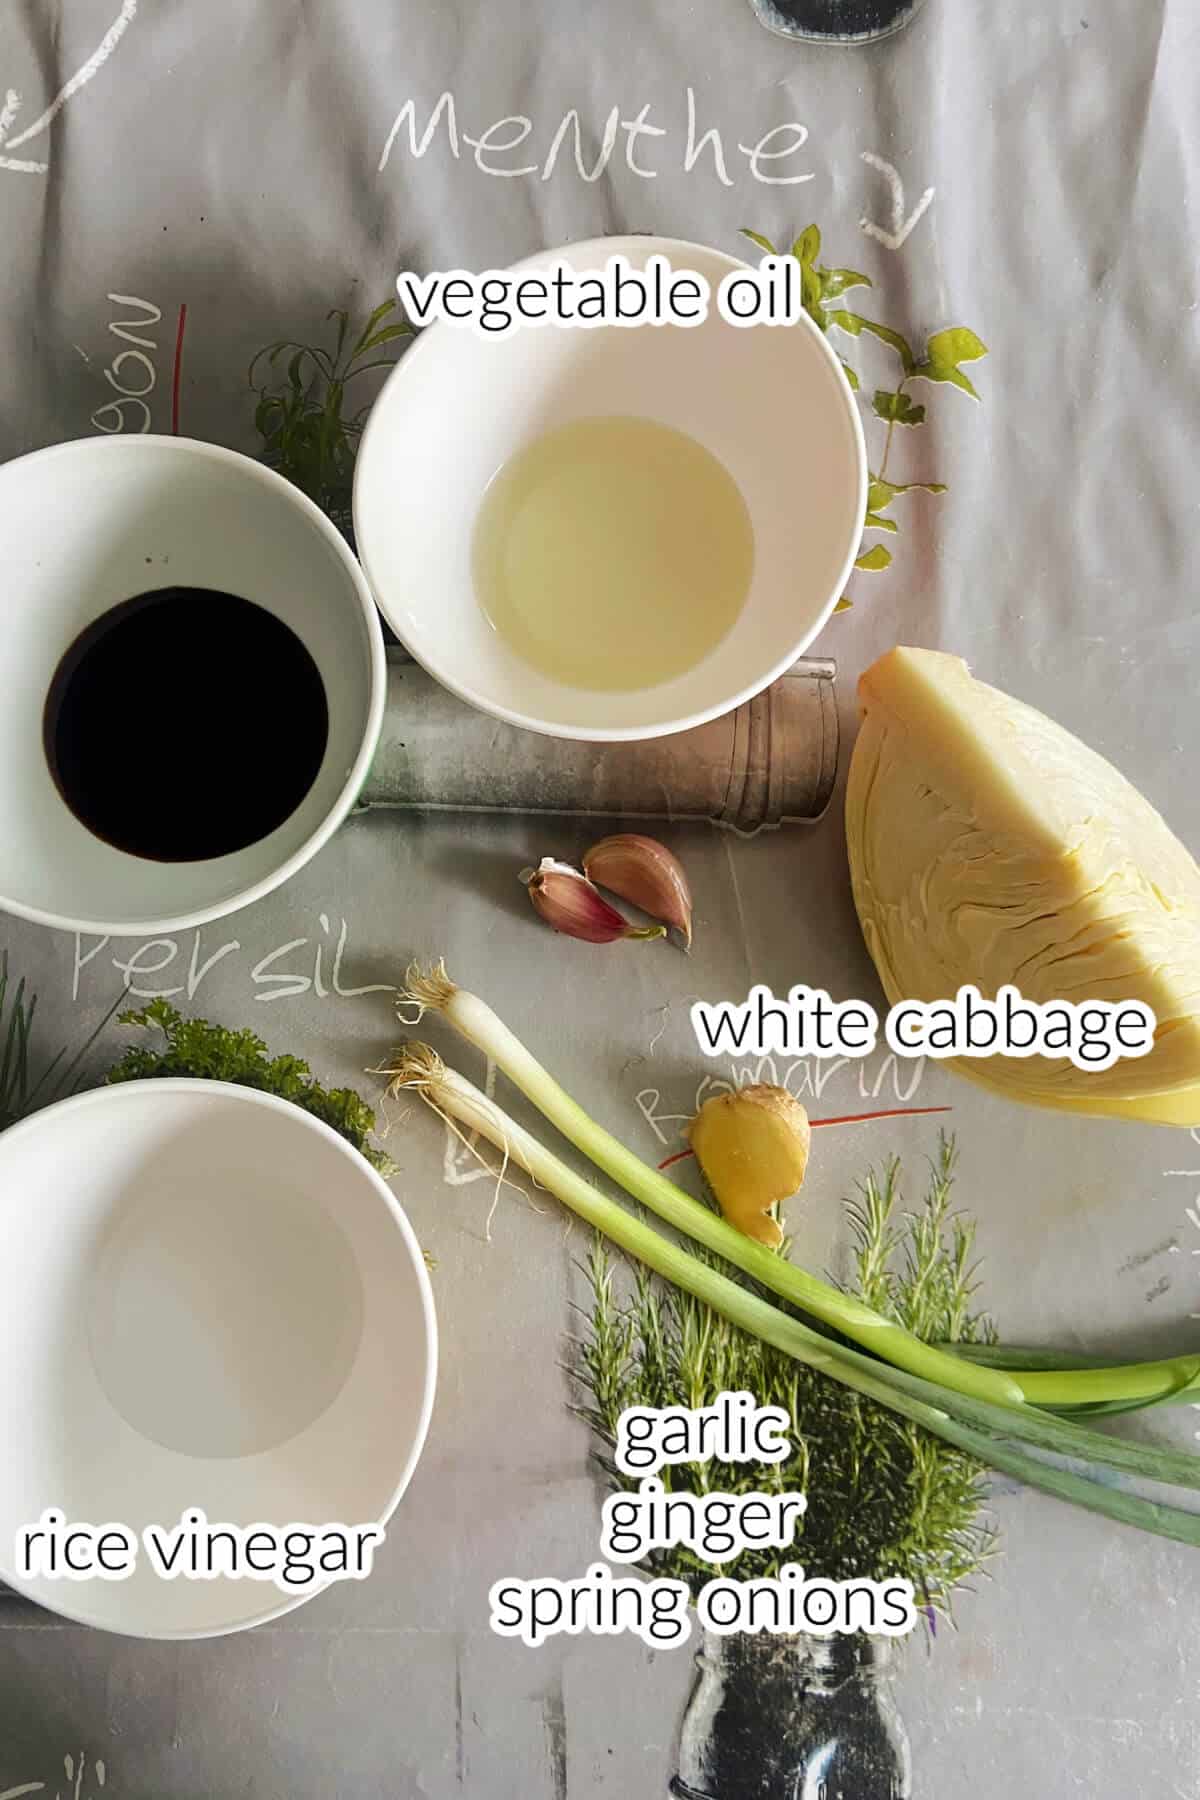 Ingredients used to make Chinese stir fry with cabbage.